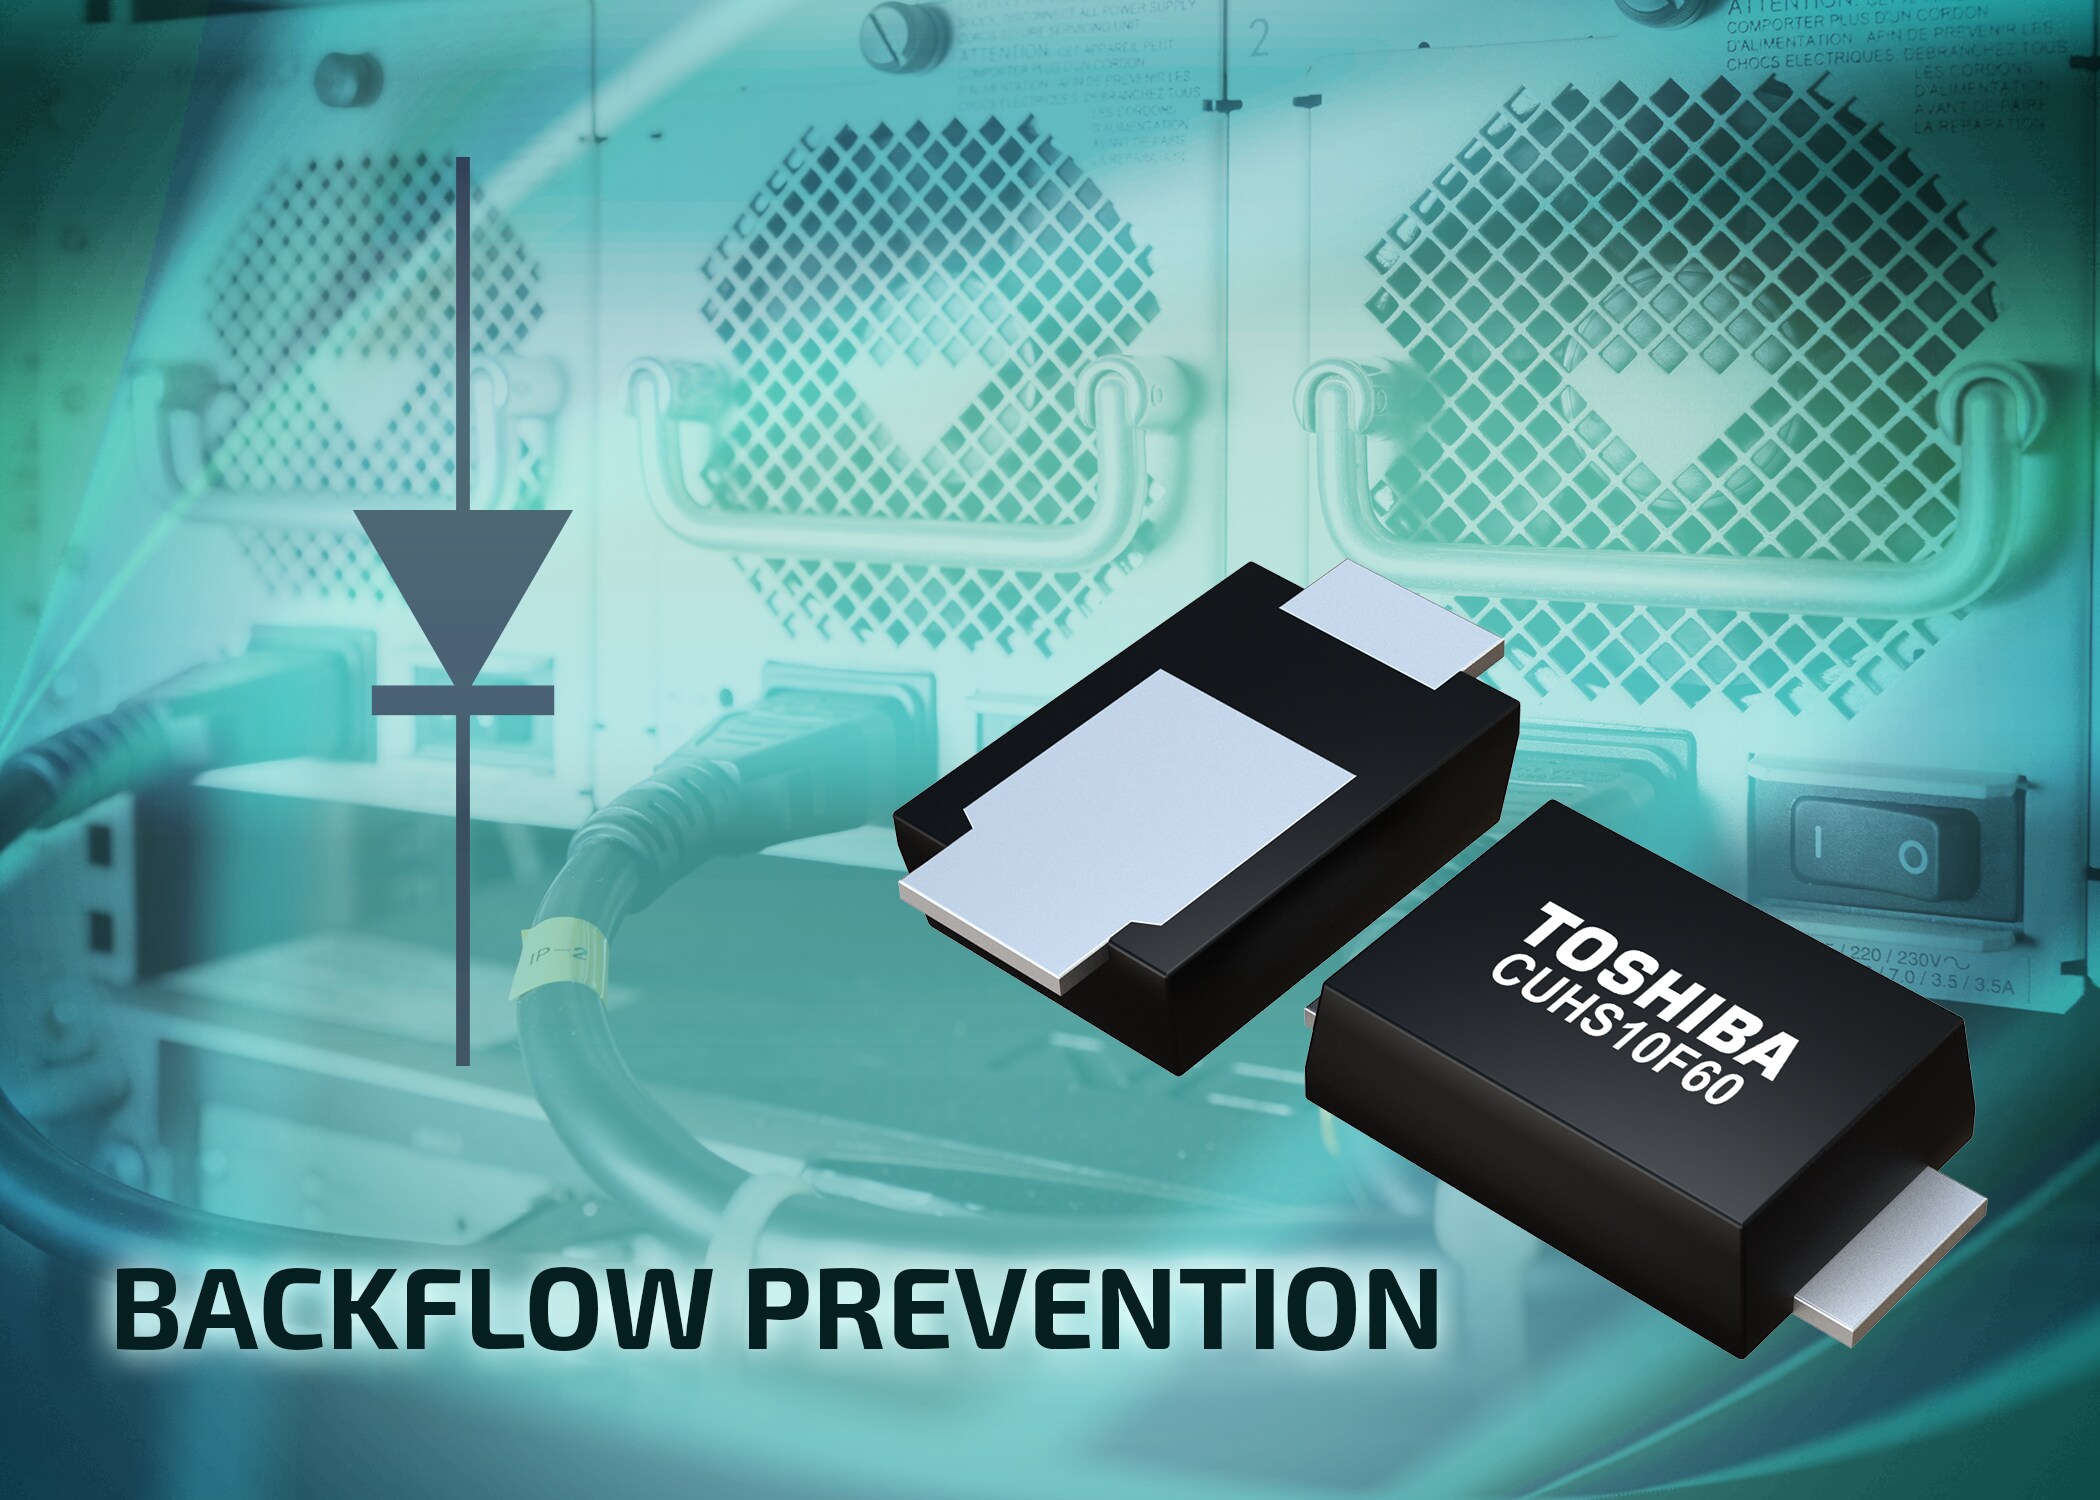 Toshiba develops low reverse-current Schottky diode with improved thermal performance